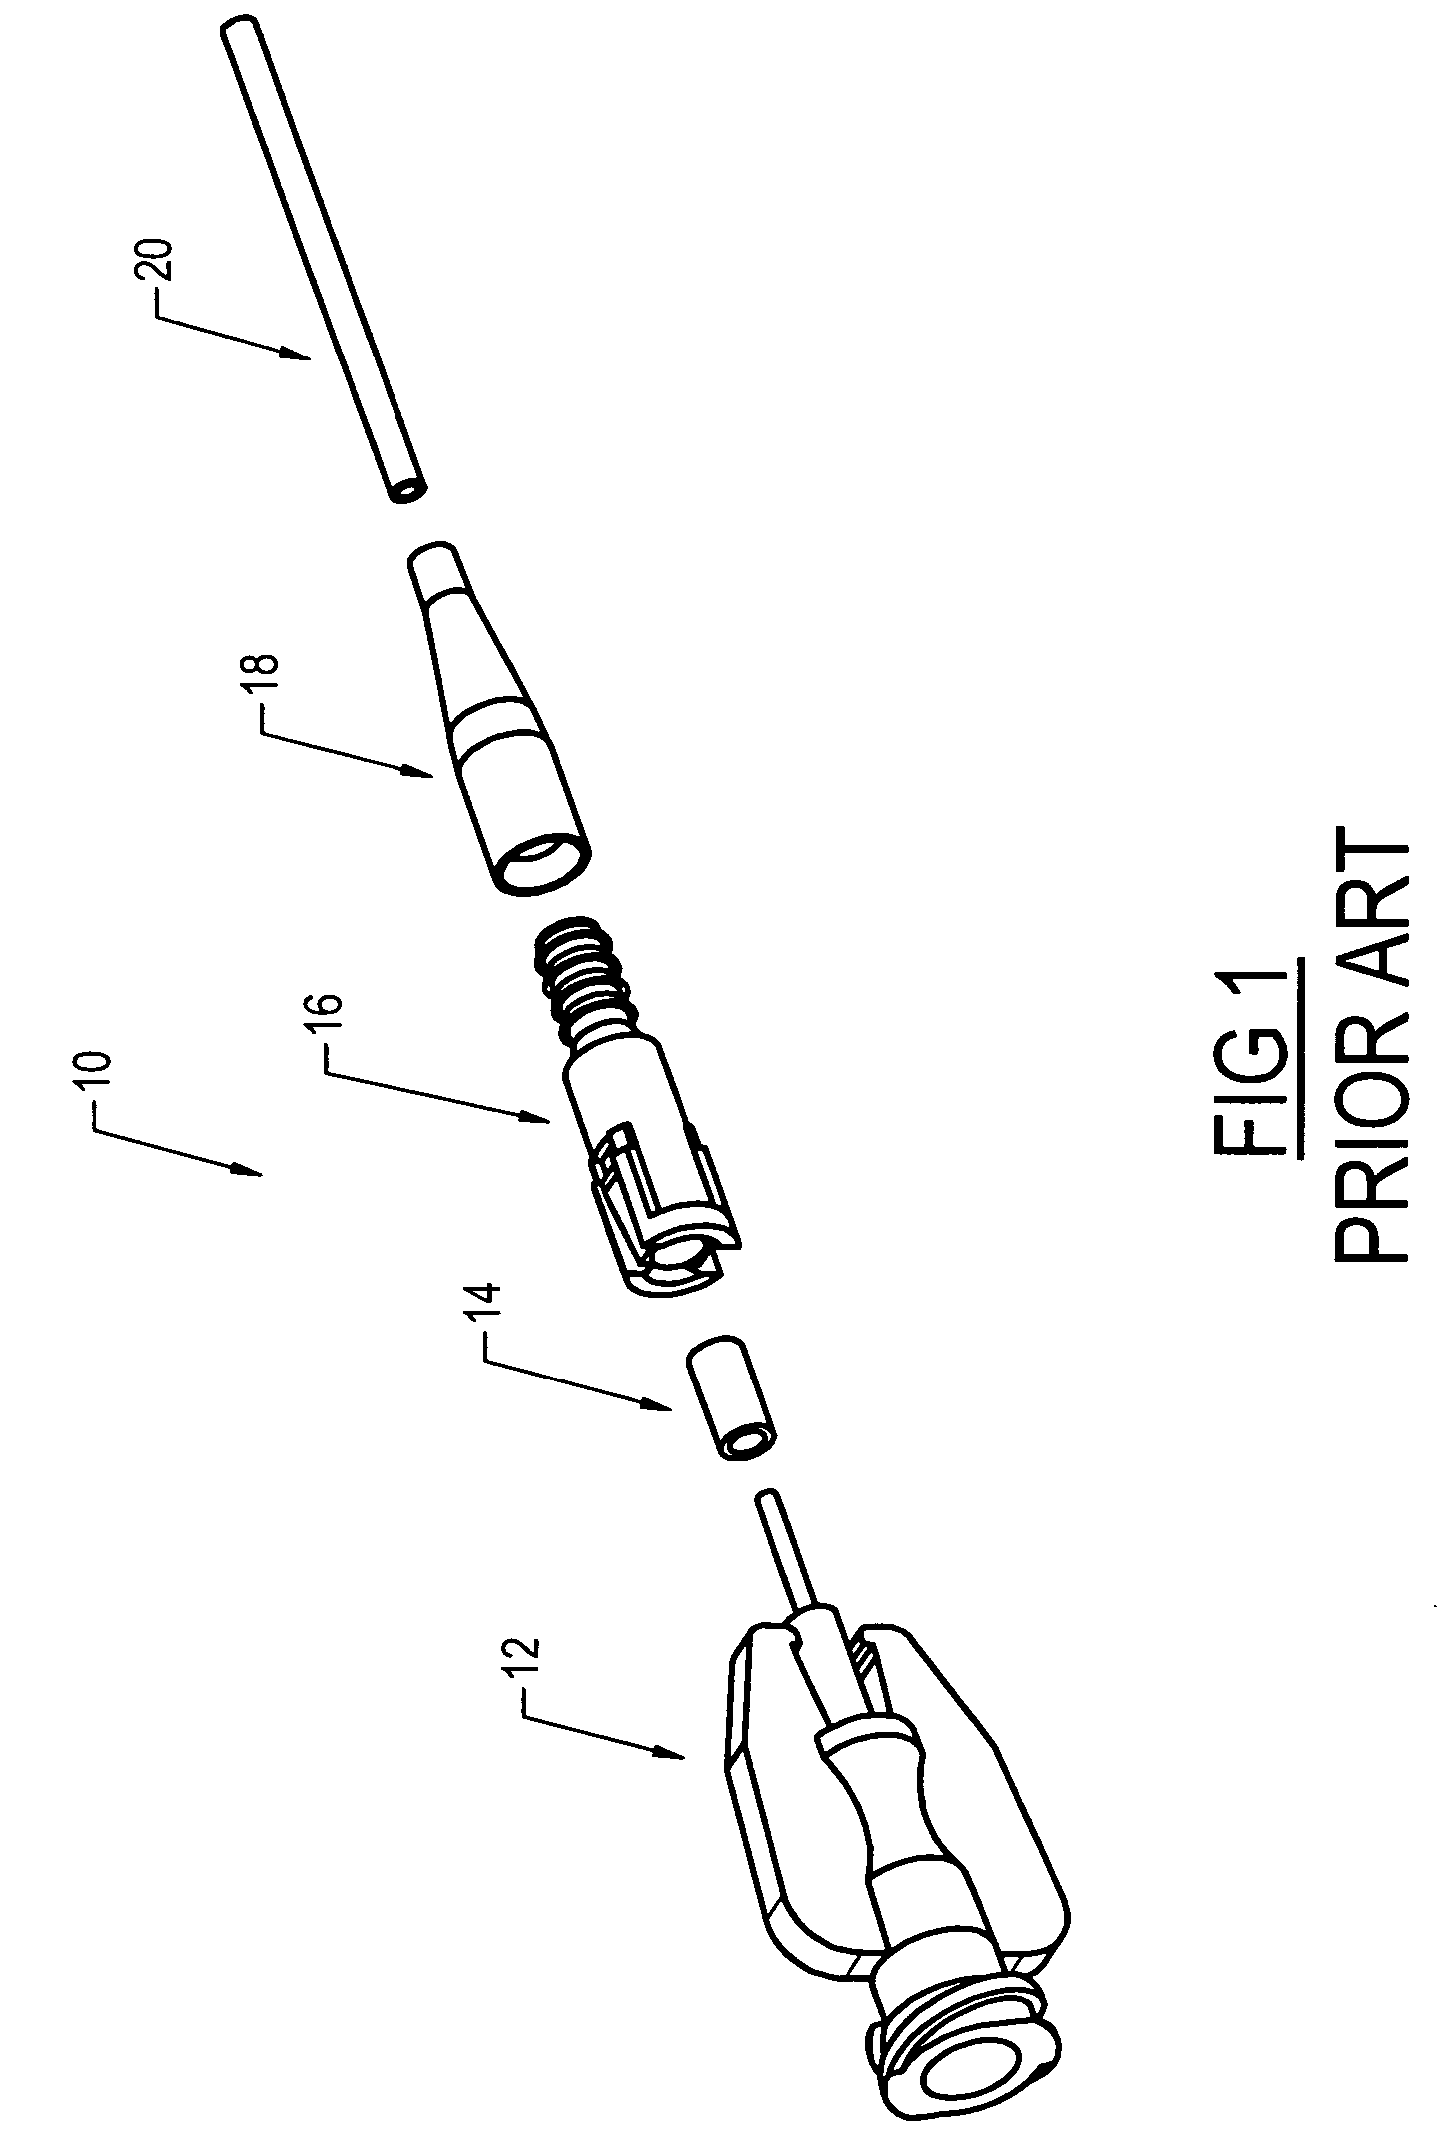 Connector system for a proximally trimmable catheter